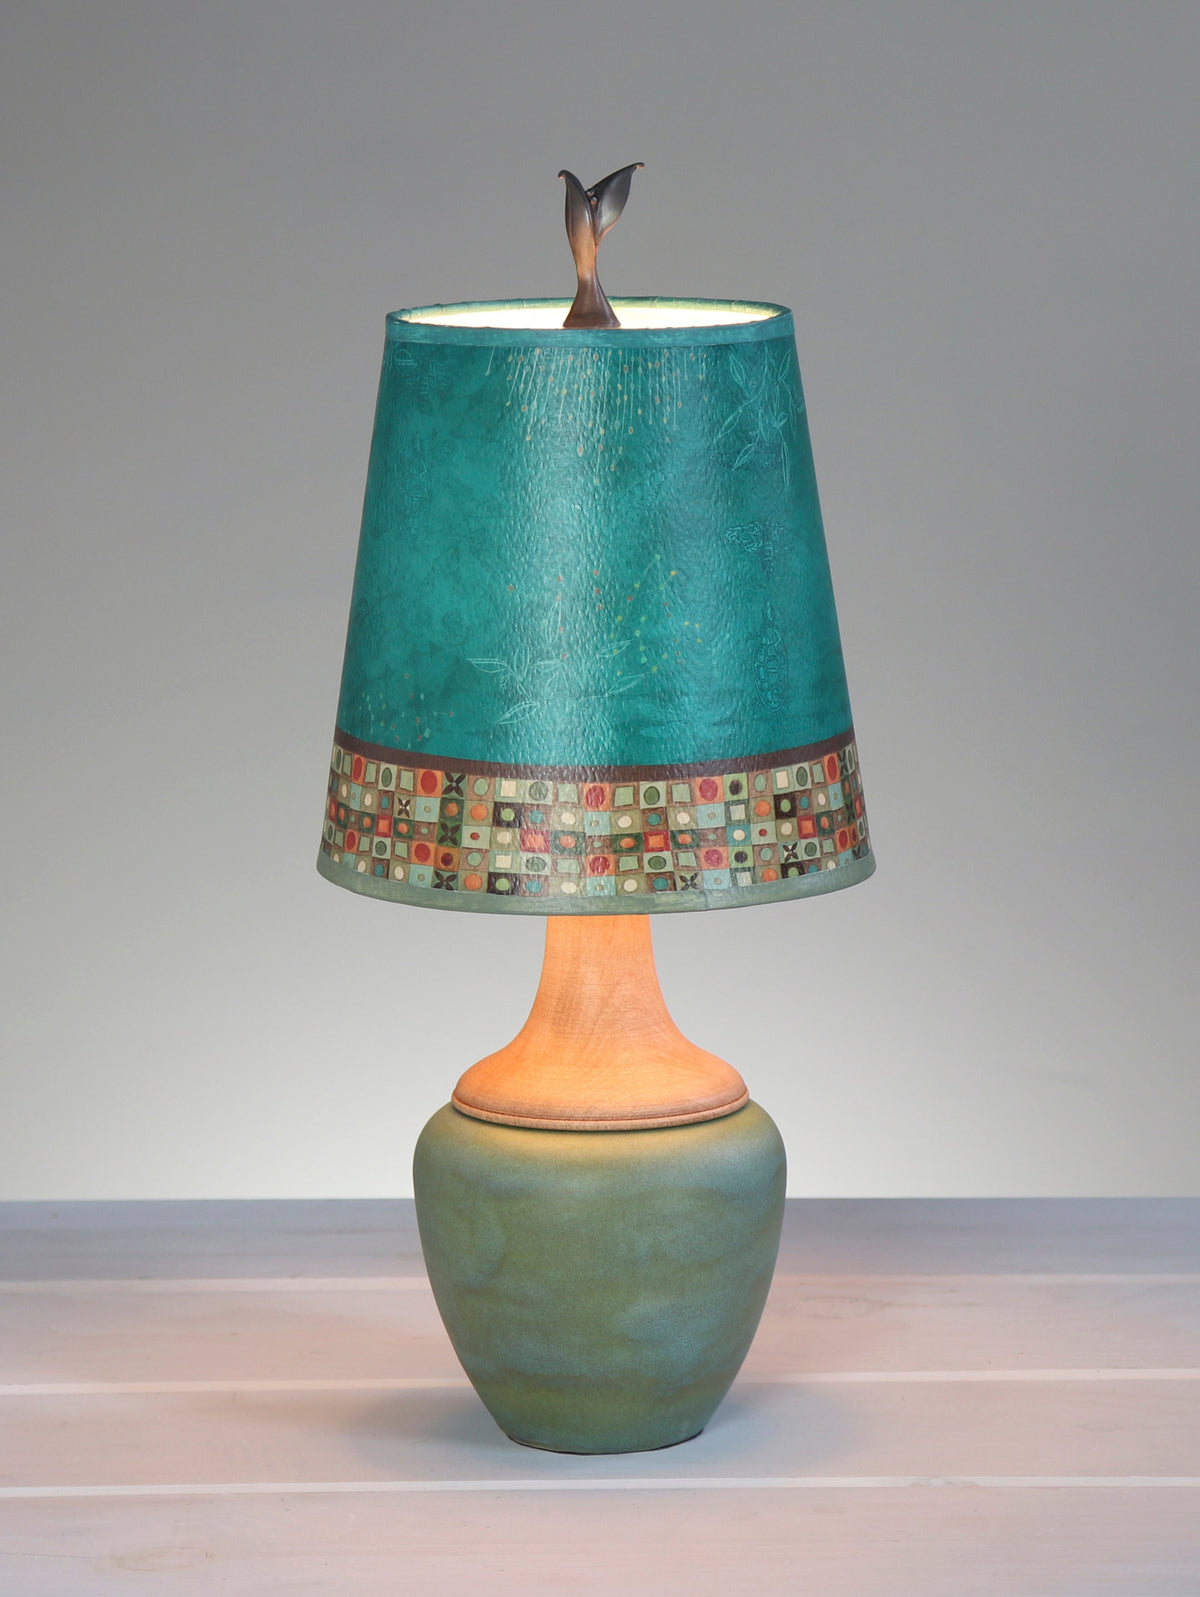 Janna Ugone &amp; Co Table Lamps Ceramic and Maple Table Lamp with Small Drum Shade in Jade Mosaic